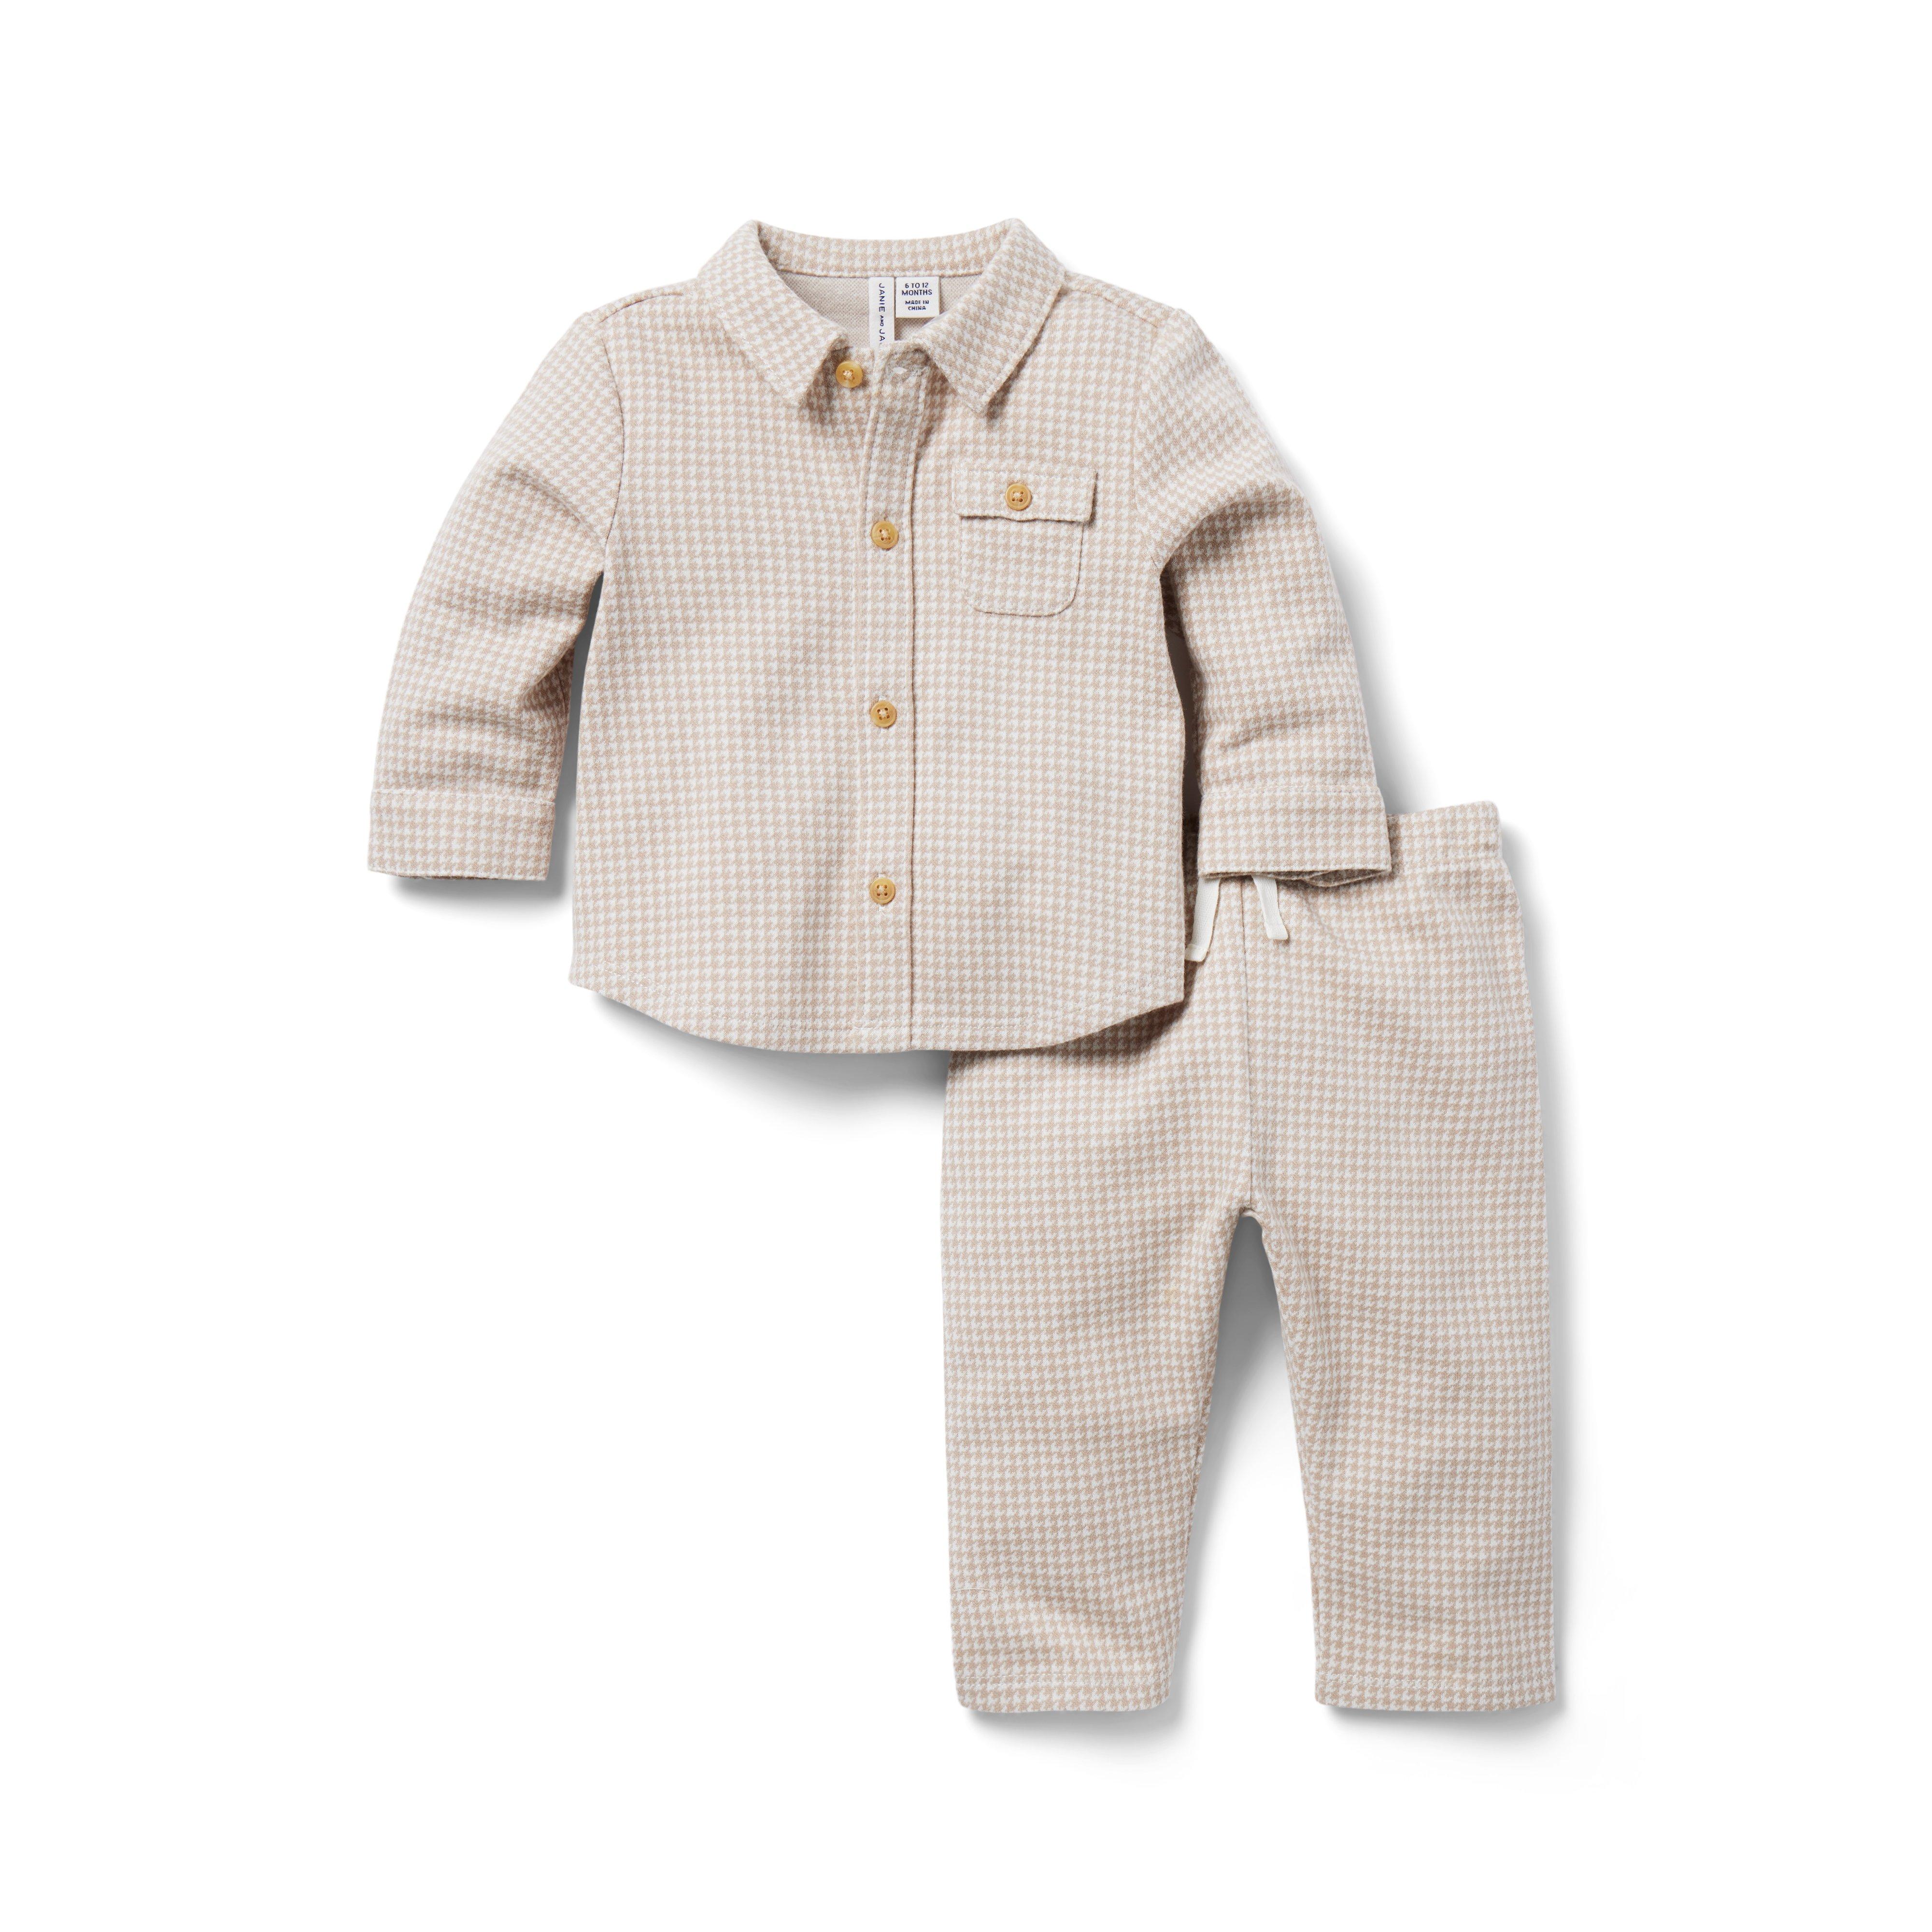 Baby Houndstooth Matching Set